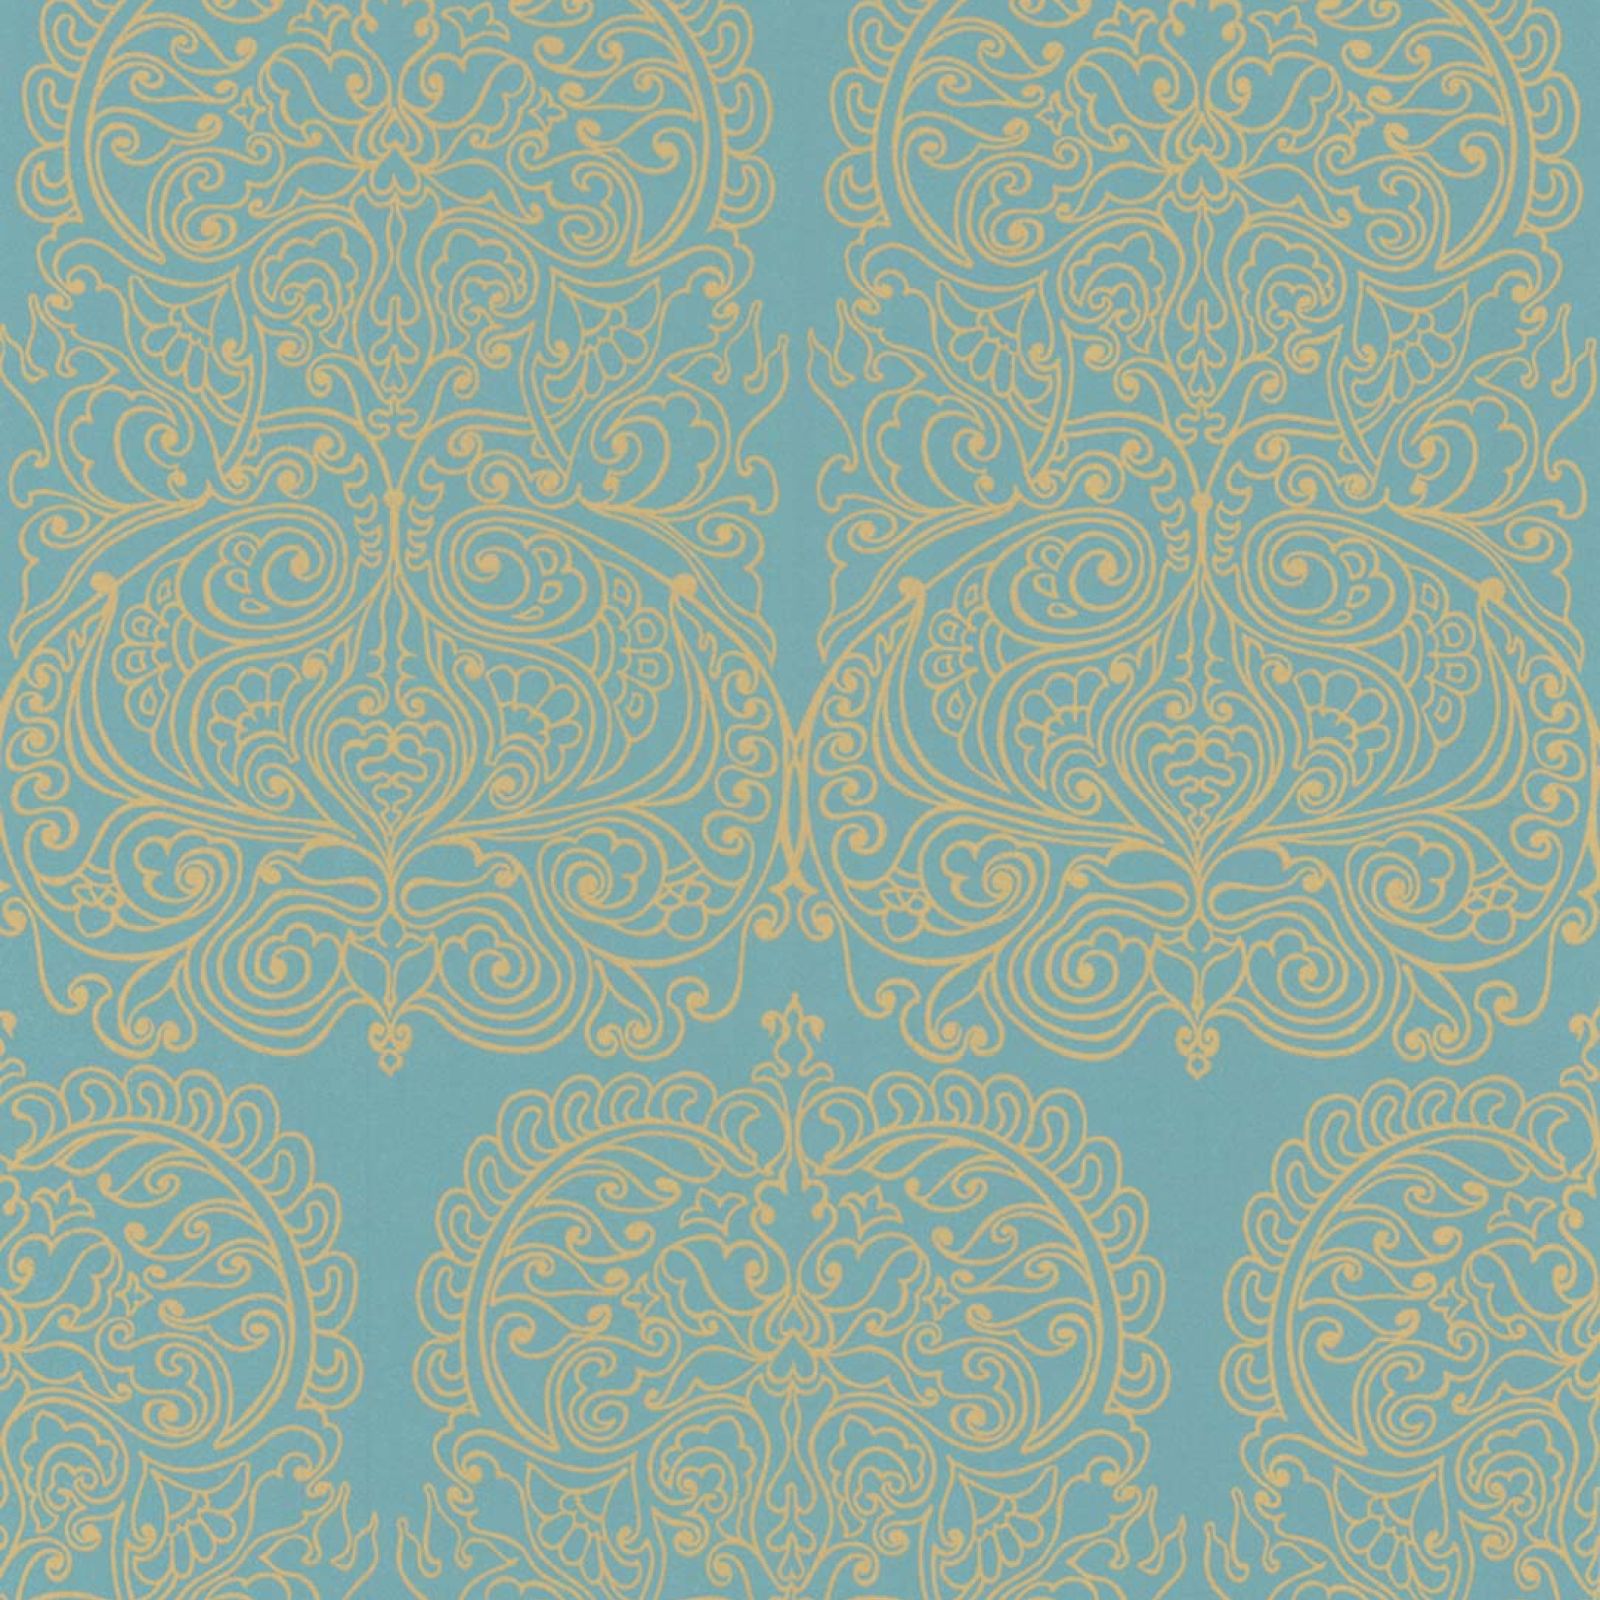 Alpania wallpaper in choice of two colourways